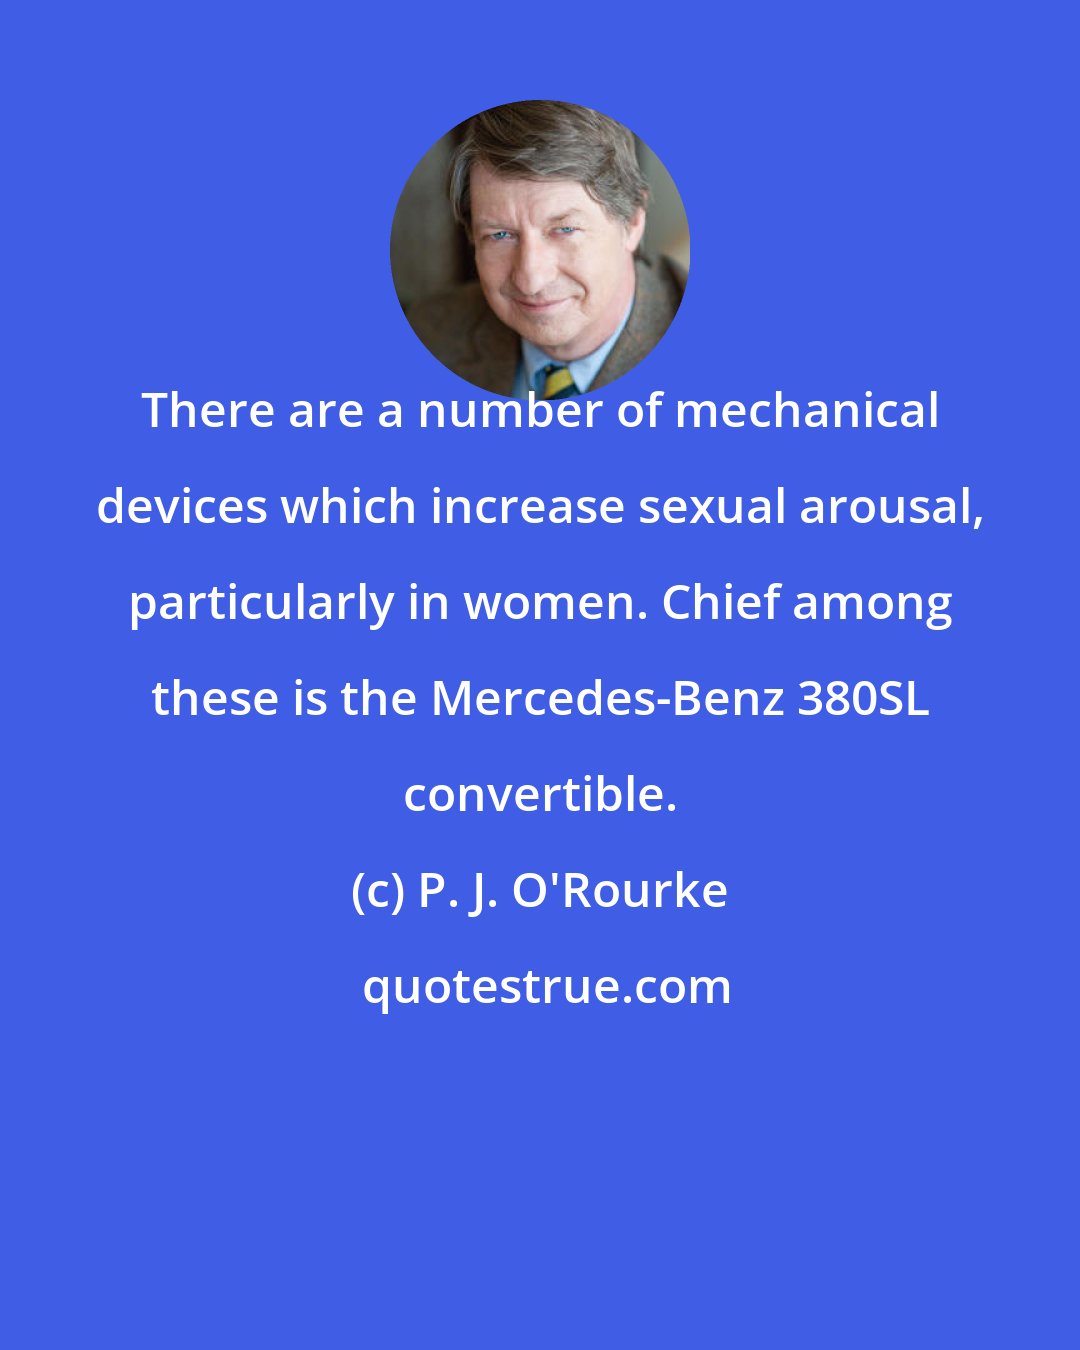 P. J. O'Rourke: There are a number of mechanical devices which increase sexual arousal, particularly in women. Chief among these is the Mercedes-Benz 380SL convertible.